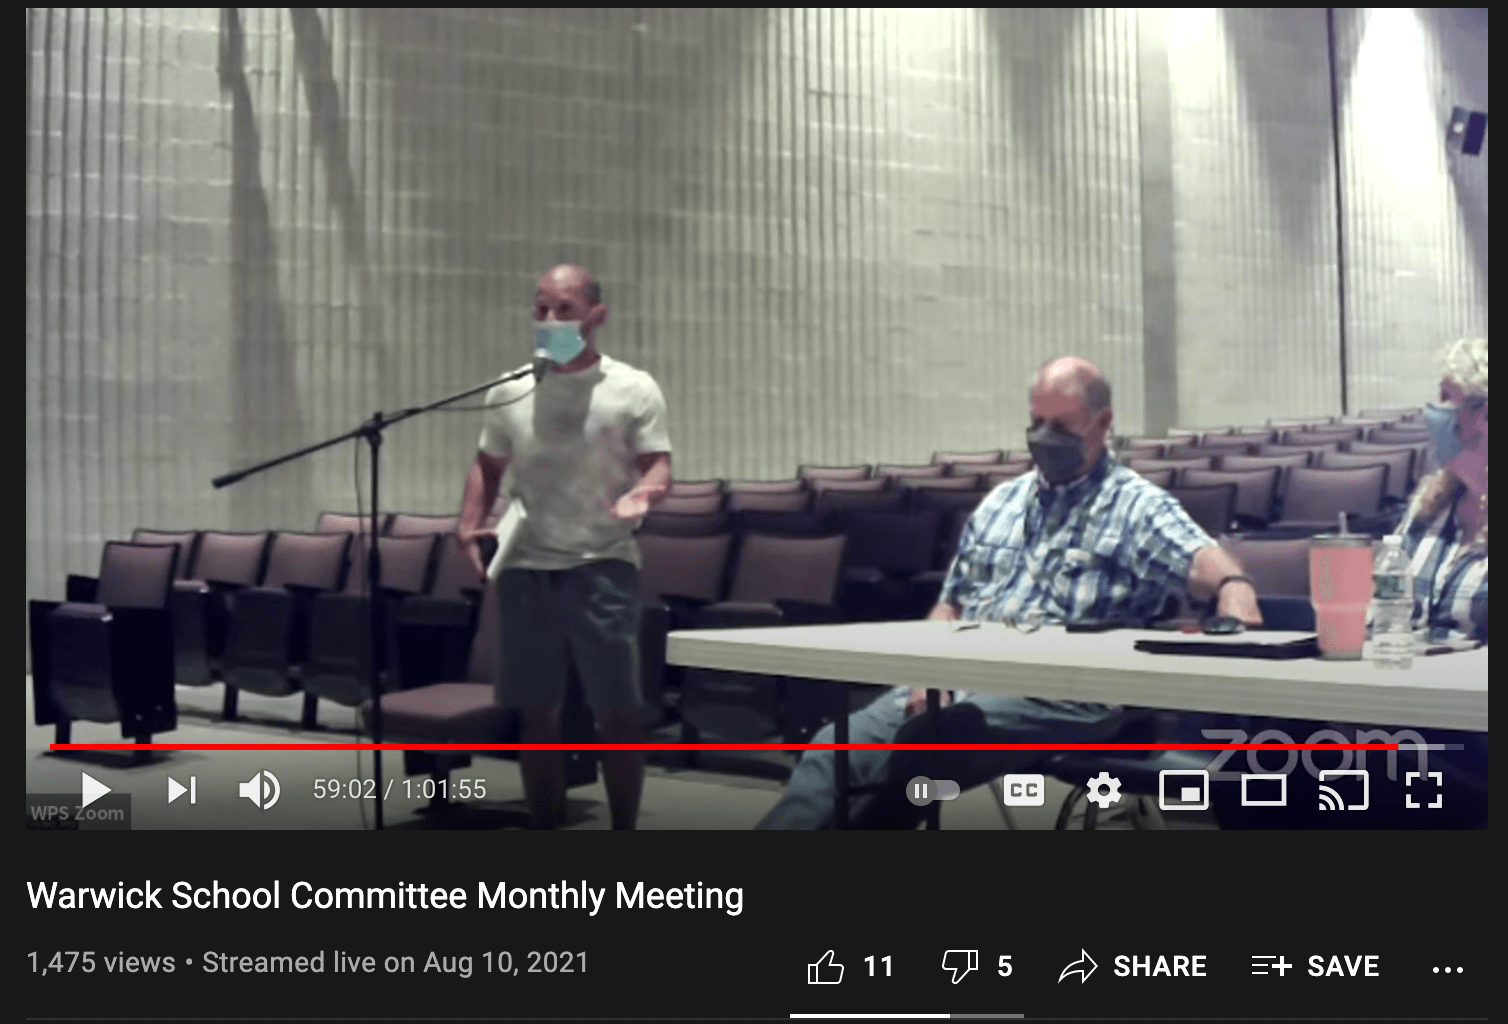 [CREDIT: YouTube] A screenshot of the Aug. 10 Warwick School Committee livestream on Aug. 10, viewed by about 1,400 people.